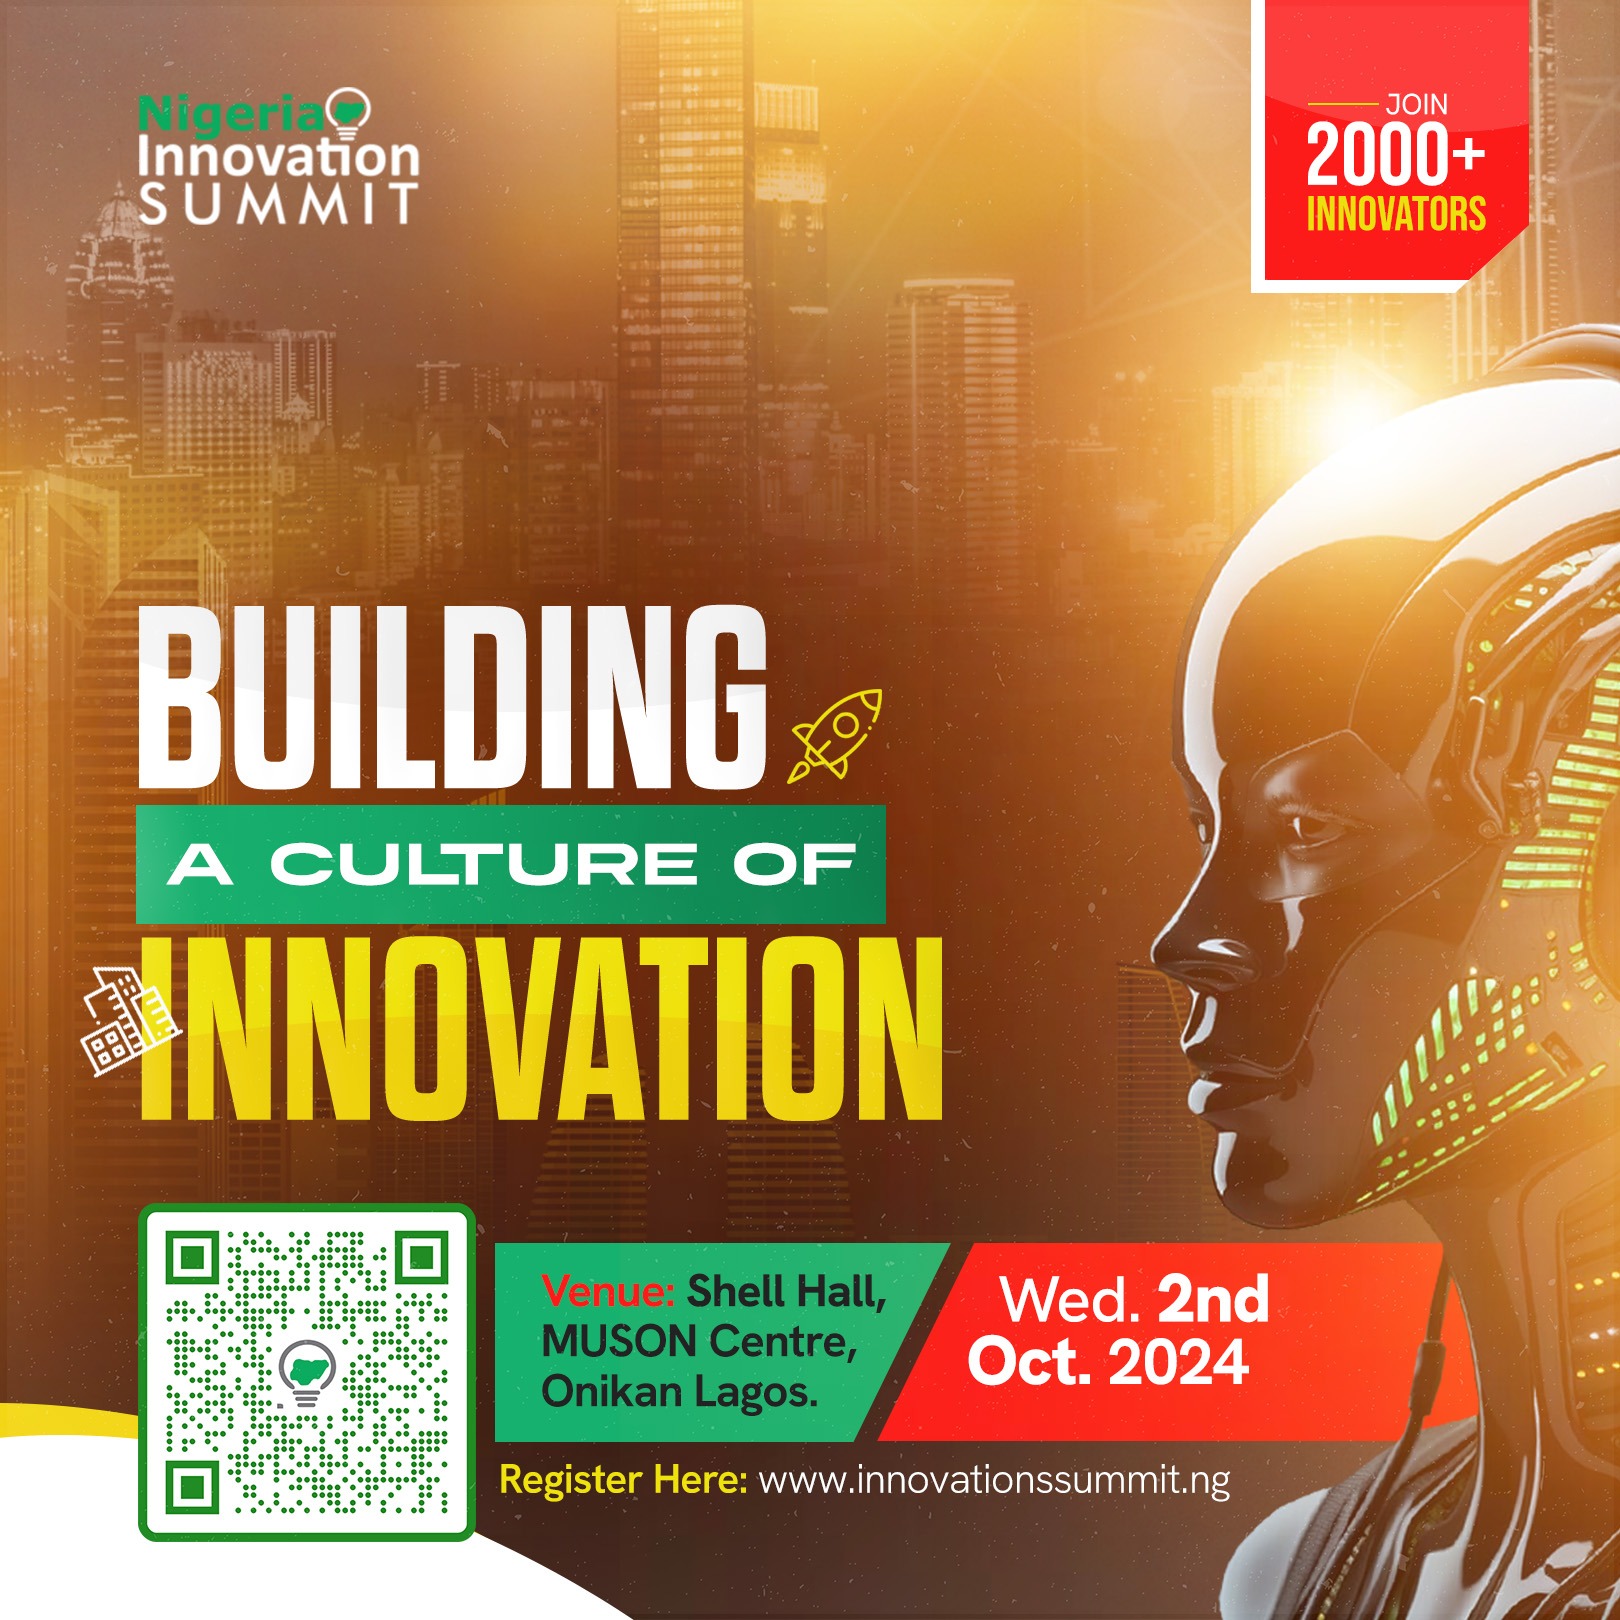 The organizers of the Nigeria Innovation Summit announce date, theme for NIS 9.0